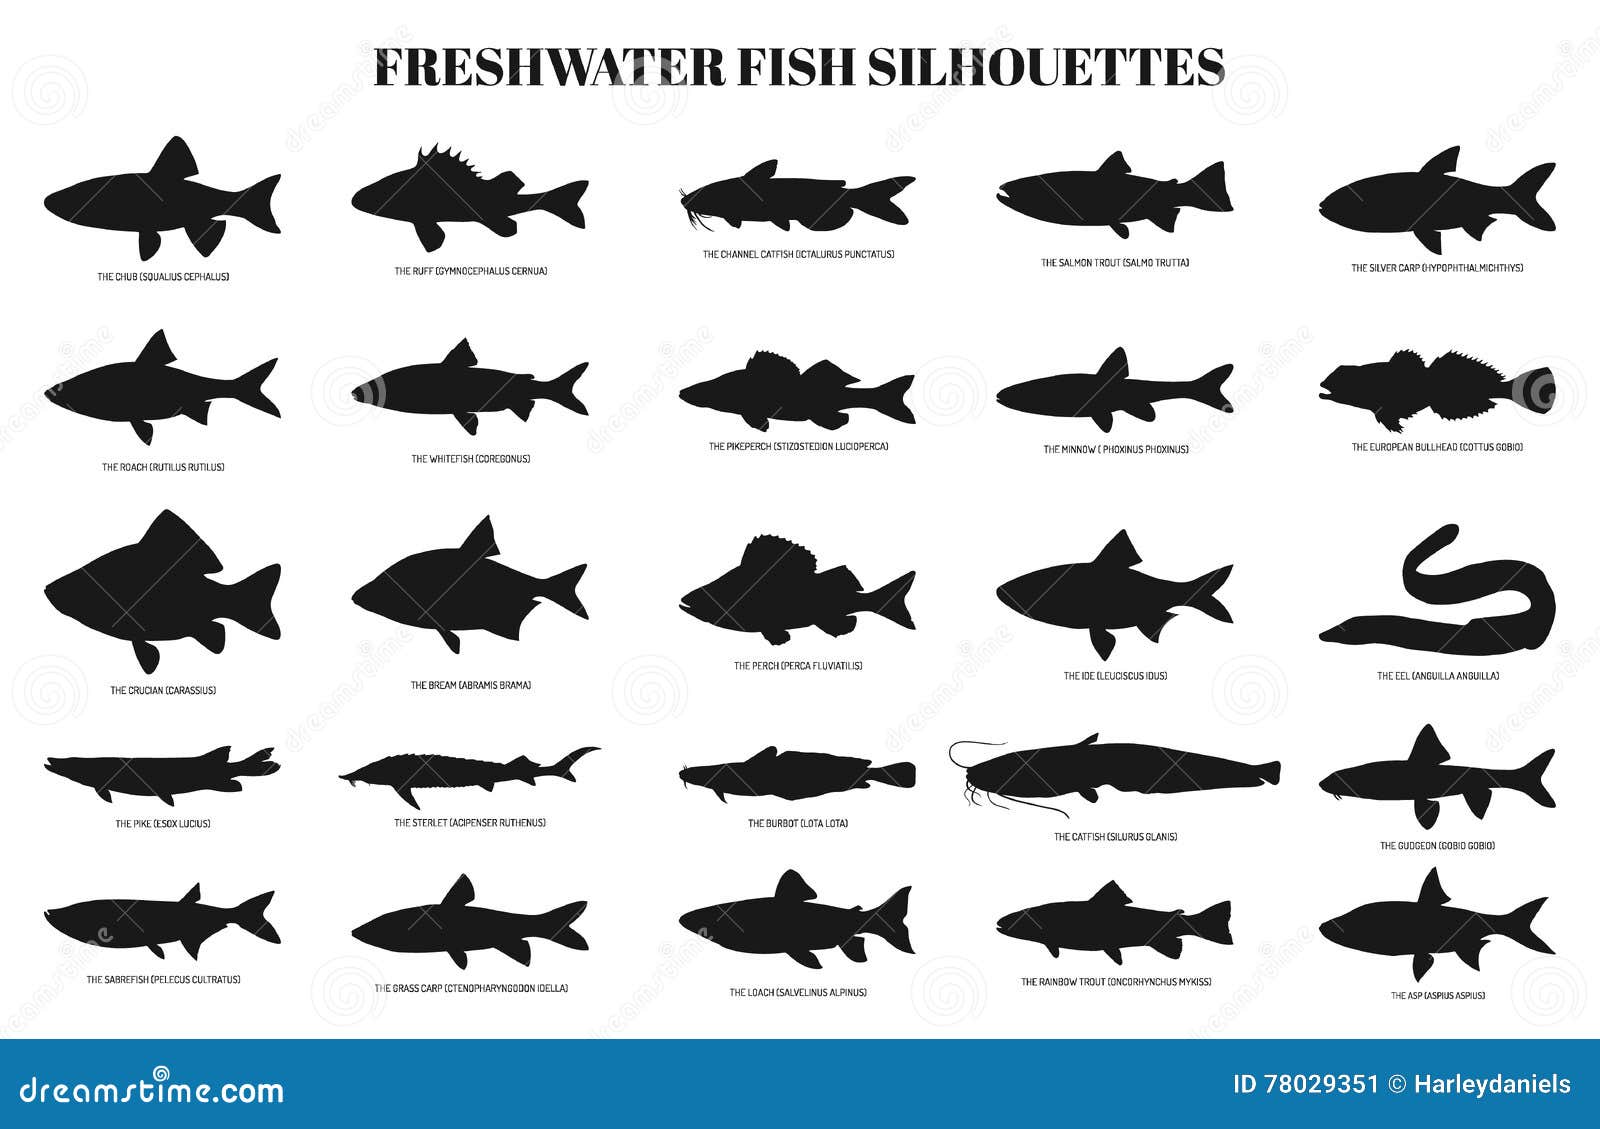 freshwater fishes silhouettes